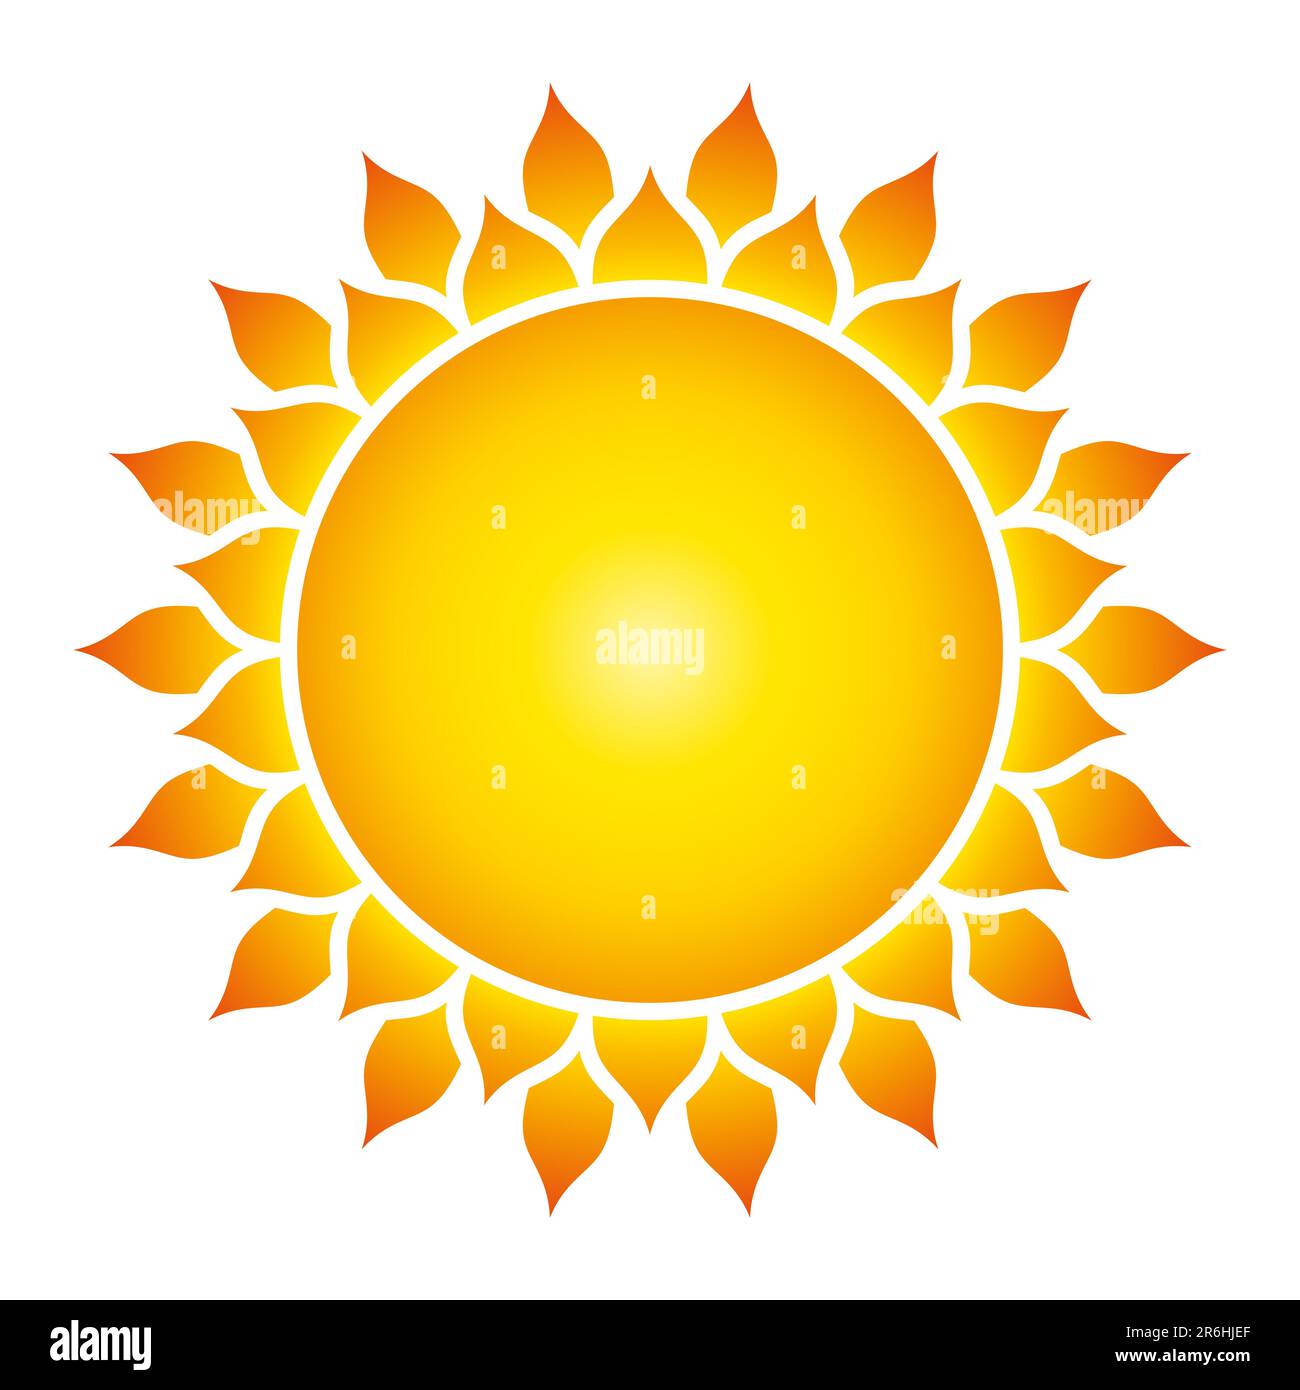 Sun symbol and solar disk with thirty-six flames. Bright, colorful and golden sunflower-like pattern. Sacred Geometry, modeled on crop circle pattern. Stock Photo